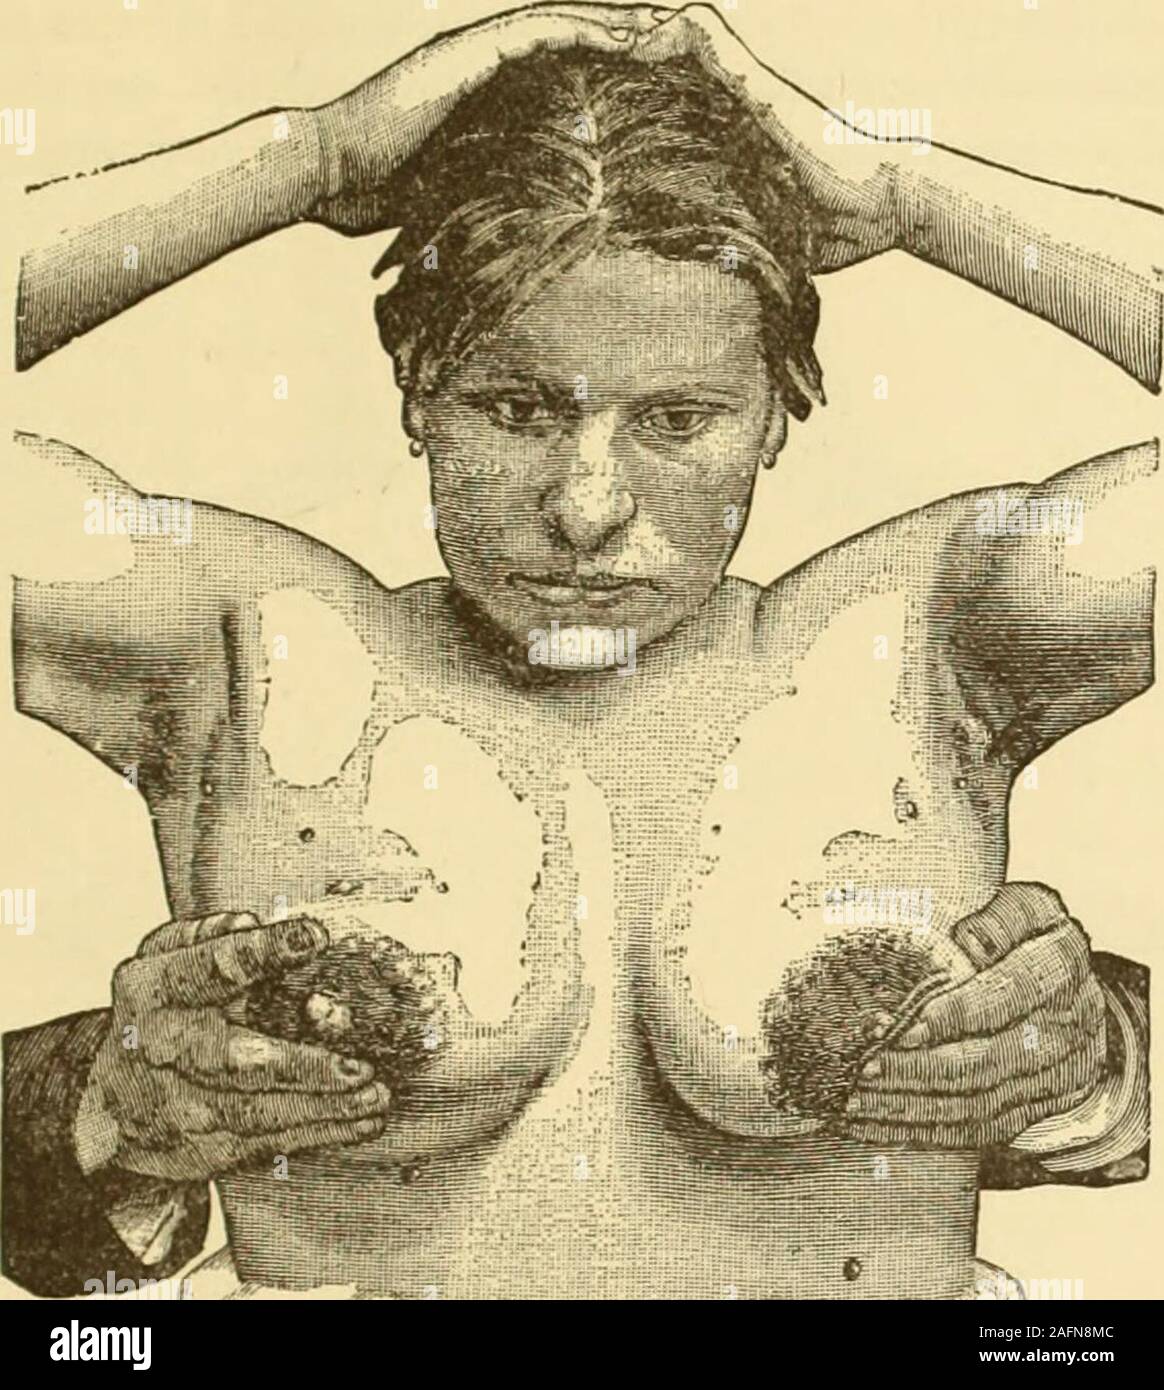 Clinical gyncology, medical and surgical. lia.—In polythelia the  supernumerary nipples follow a linefrom the normal nipple downward and  inward, or upward and outward.This, according to Wiedersheim, would  correspond to the milk-line